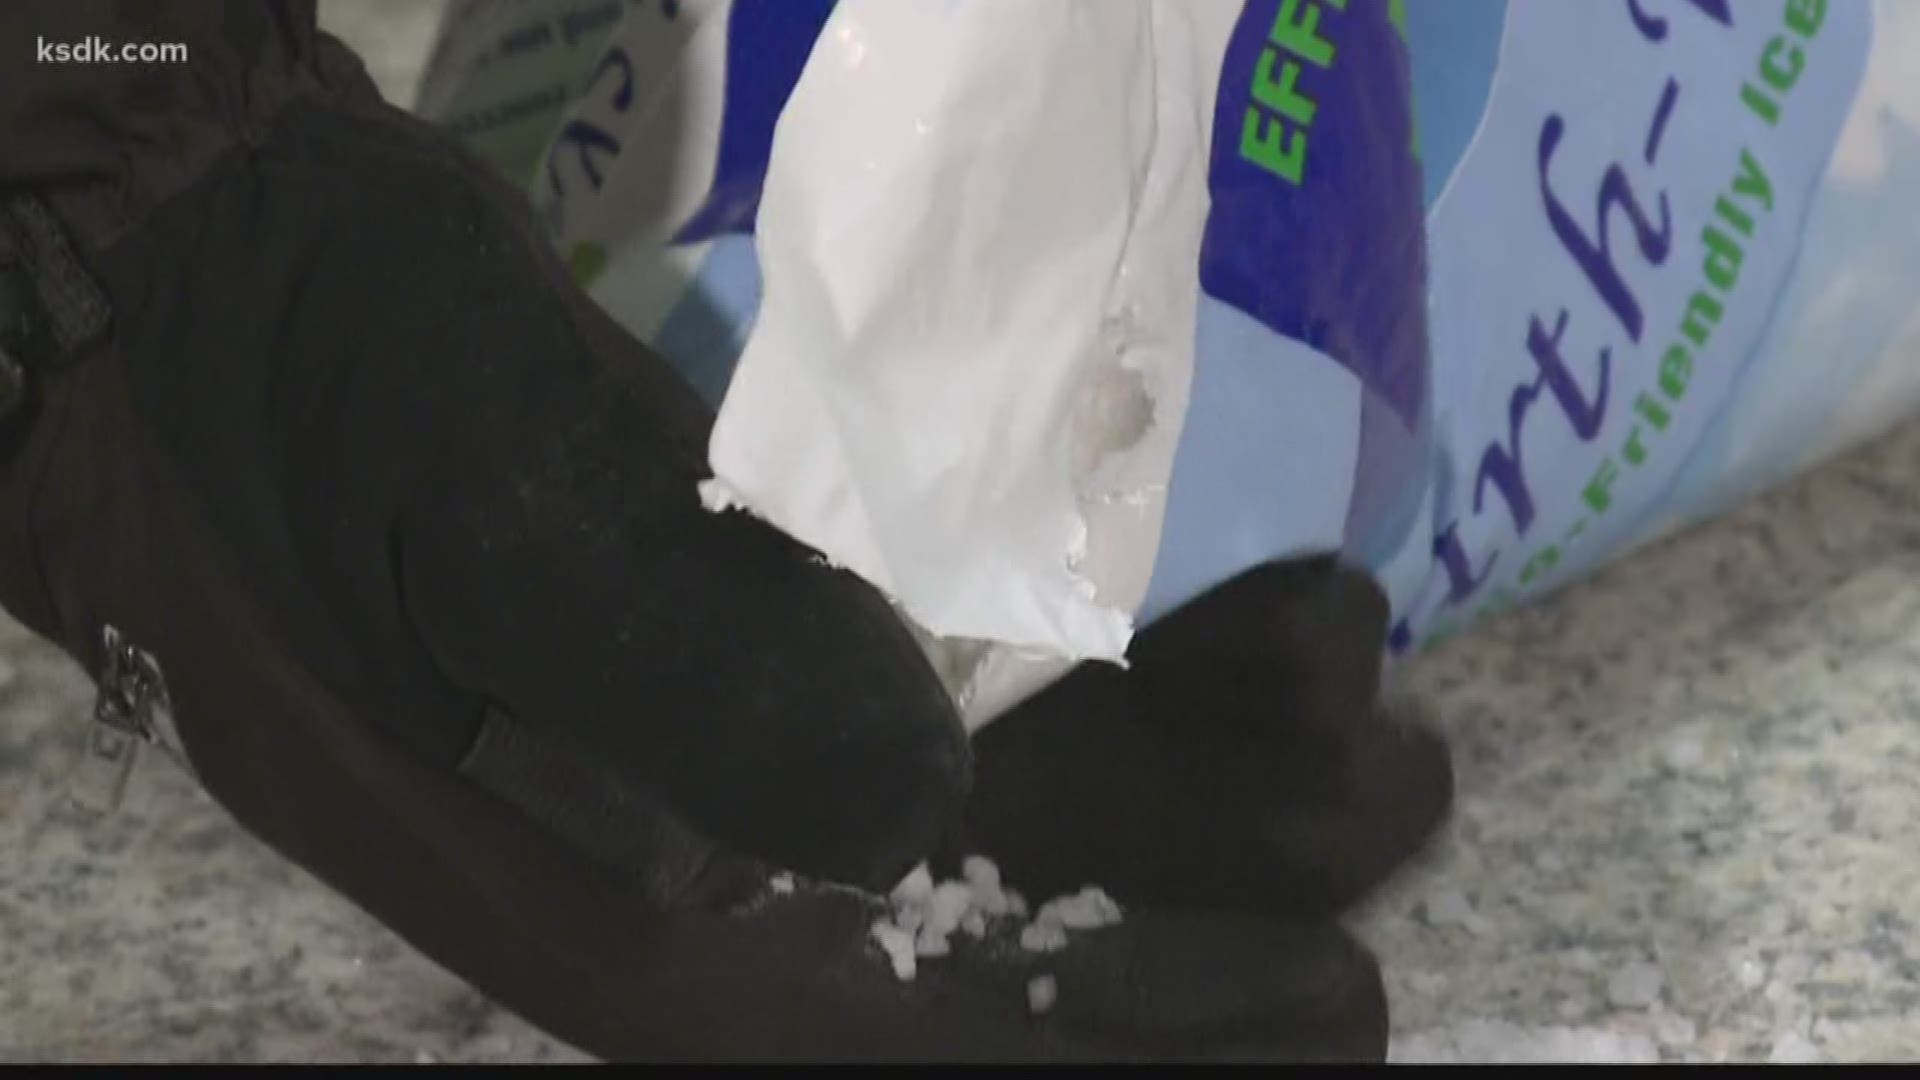 Local hardware stores are seeing a boom of business because of the winter weather.